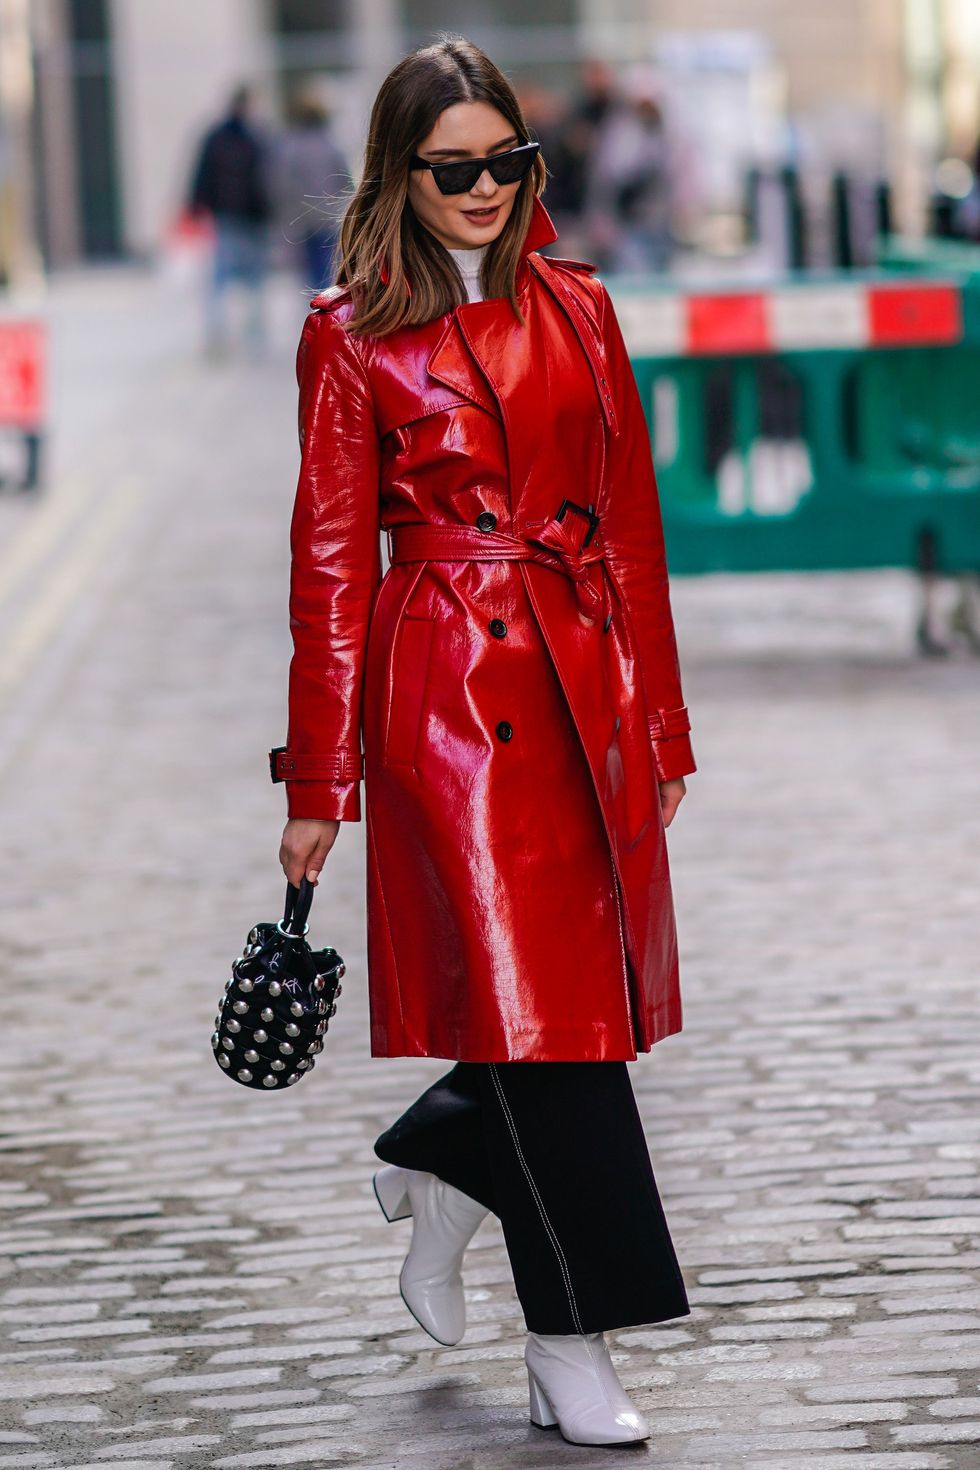 How to wear a patent trench coat – Best leather trench coats to